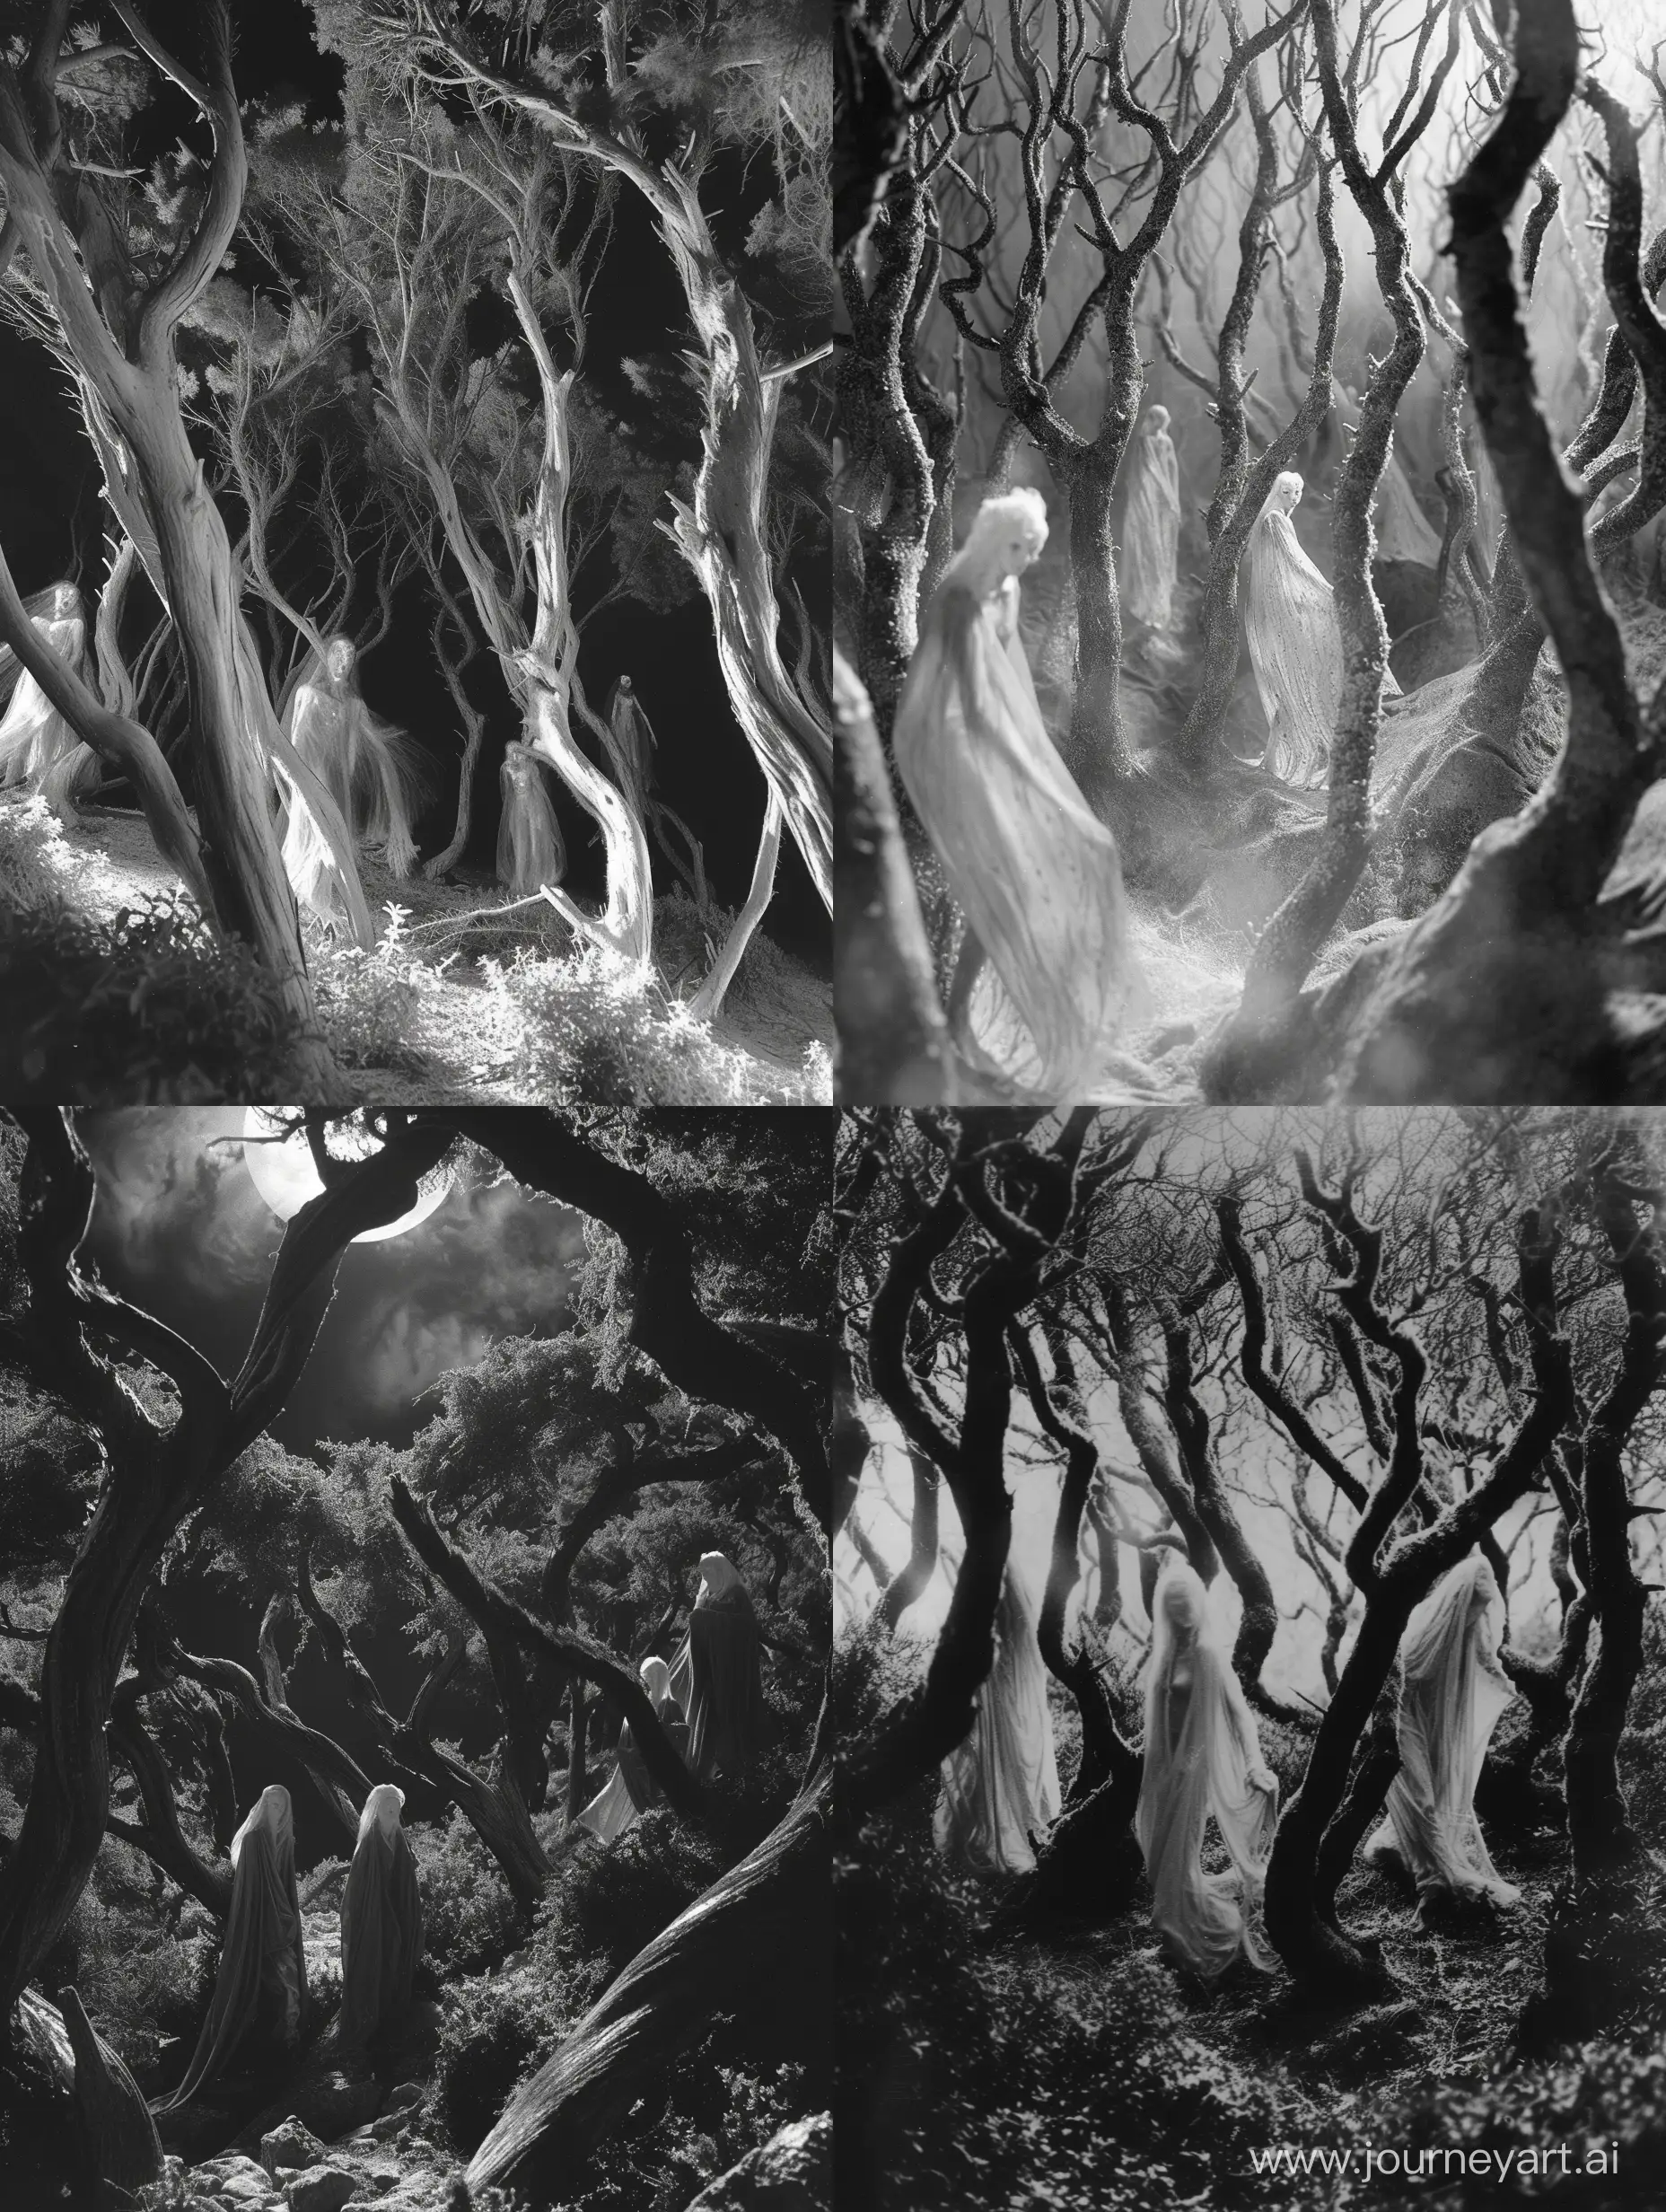 grayscale photo of an ancient forest, the twisted branches of the trees reaching out like skeletal fingers. Moonlight filters through the dense canopy, casting haunting shadows on the forest floor. Among the trees, ethereal figures with flowing garments and pale faces emerge, their presence evoking a sense of otherworldly horror. The composition is asymmetrical, with jagged lines and a sense of movement, adding to the unease. The expired film lends a vintage quality to the image, with subtle tonal shifts and a touch of grain that enhances the mysterious and foreboding atmosphere. This prompt embraces the keywords of "Shadowed Whispers" and "Eerie Ambiance," resulting in a truly captivating and atmospheric image. 